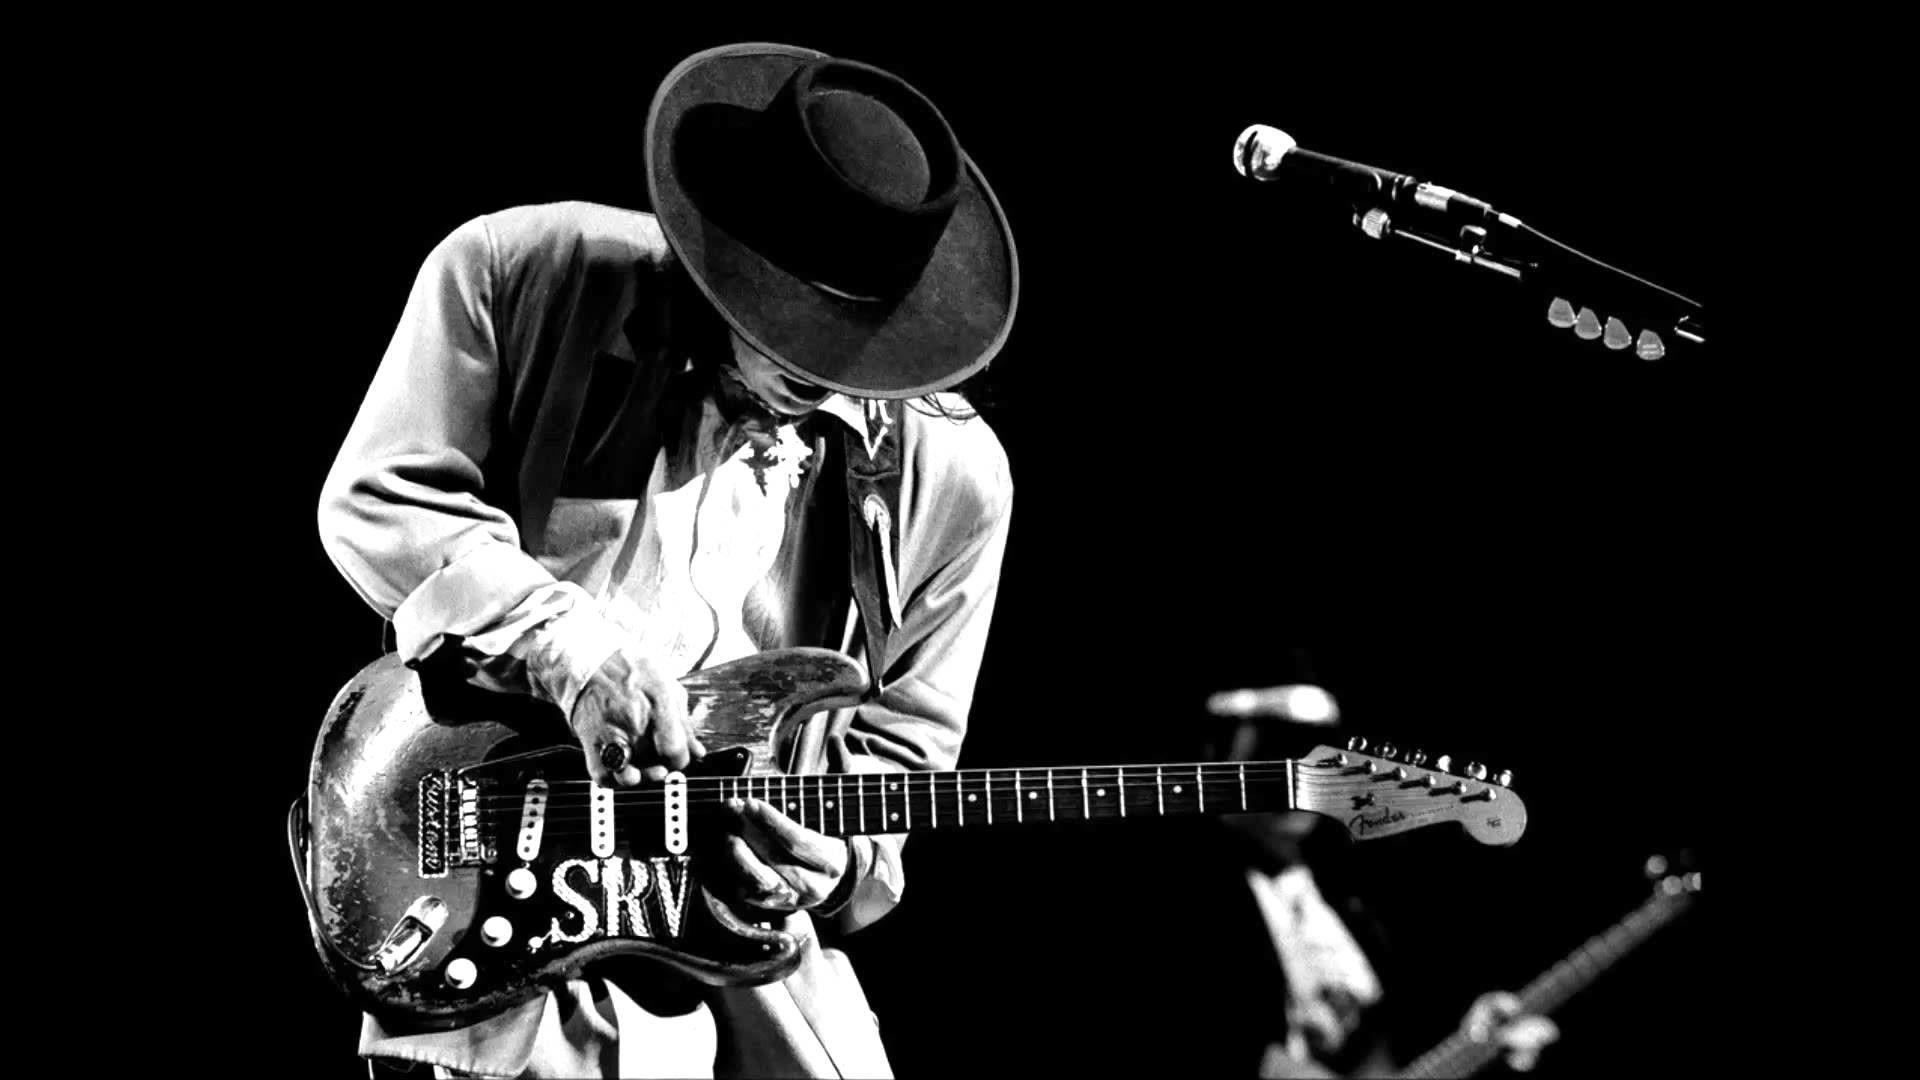 Stevie Ray Vaughan wallpaper by tbird57  Download on ZEDGE  5d42